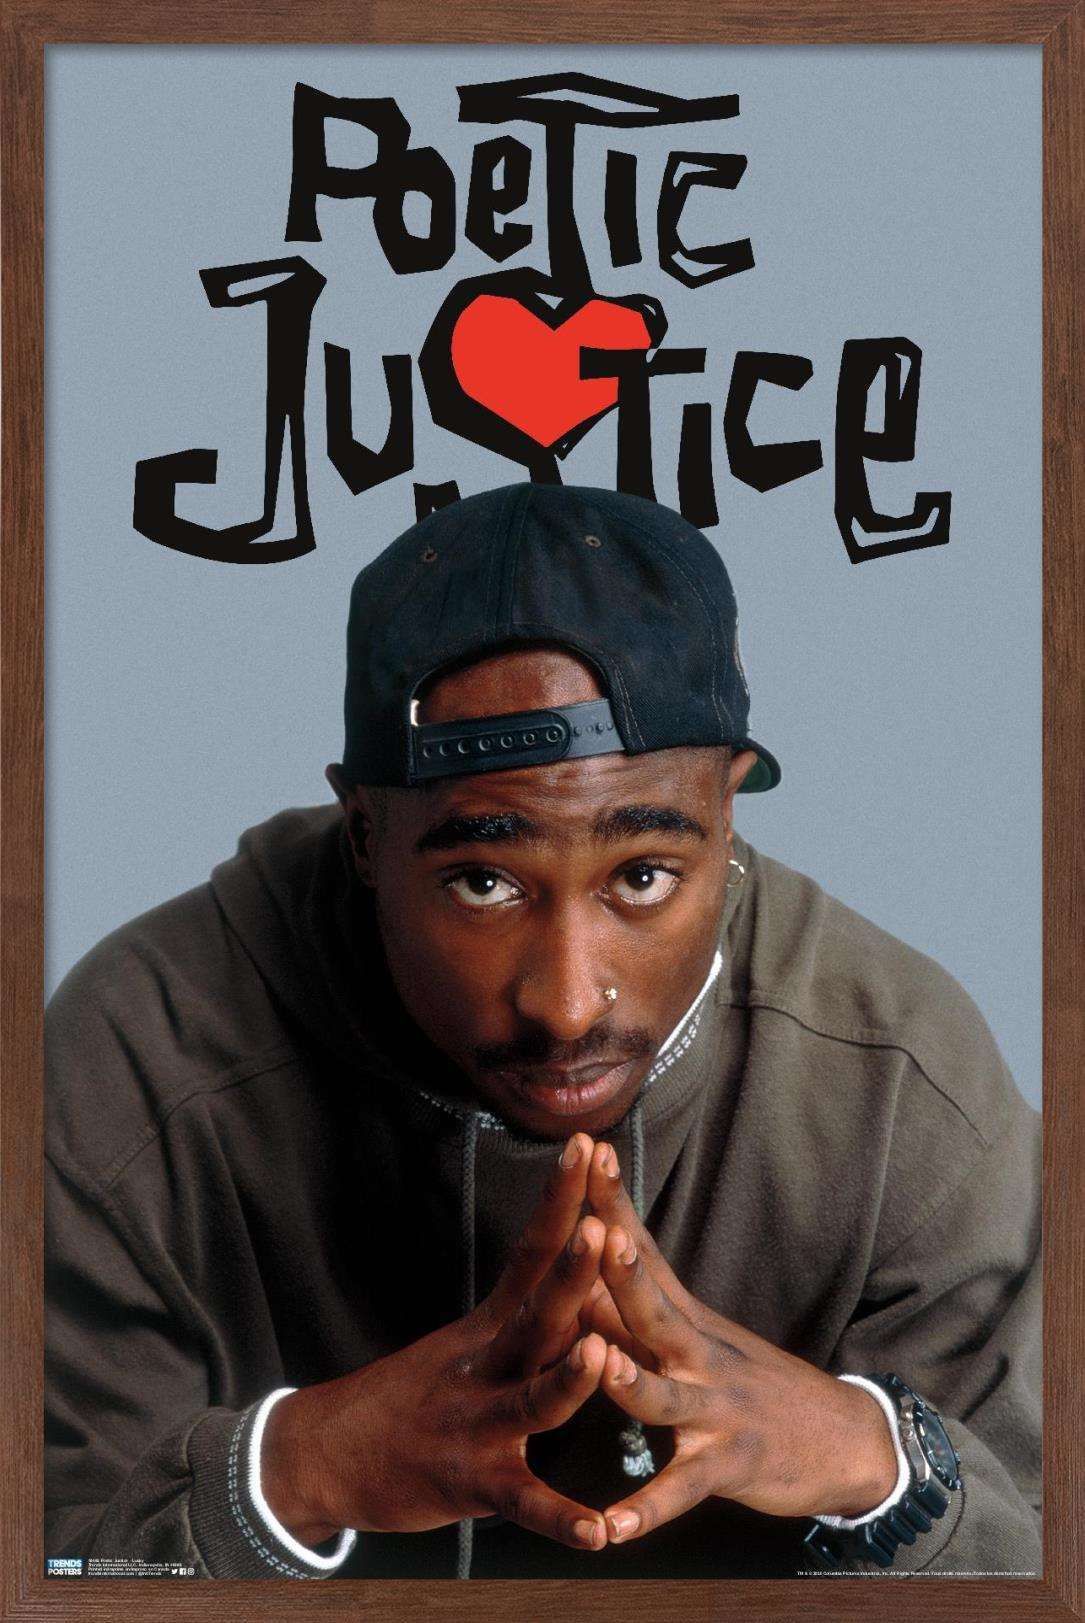 Poetic Justice Poster.com. Tupac poster, Tupac, Poetic justice